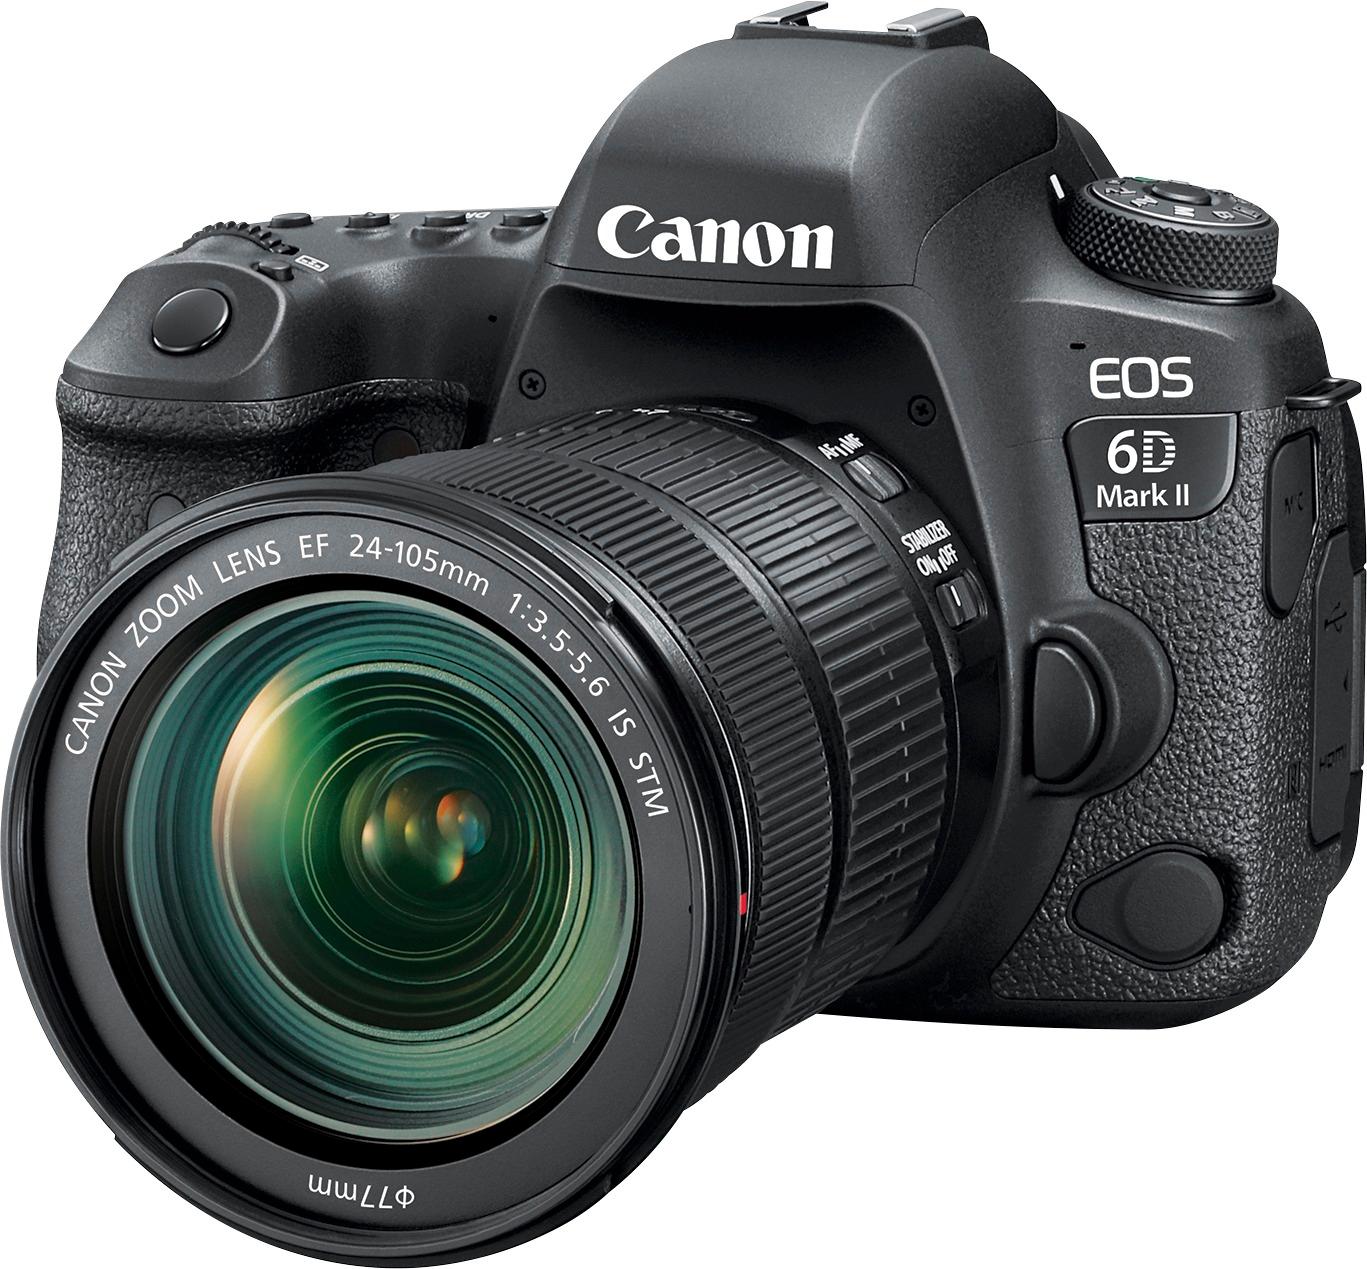 Best Buy: Canon EOS 6D Mark II DSLR Camera with EF 24-105mm f/3.5